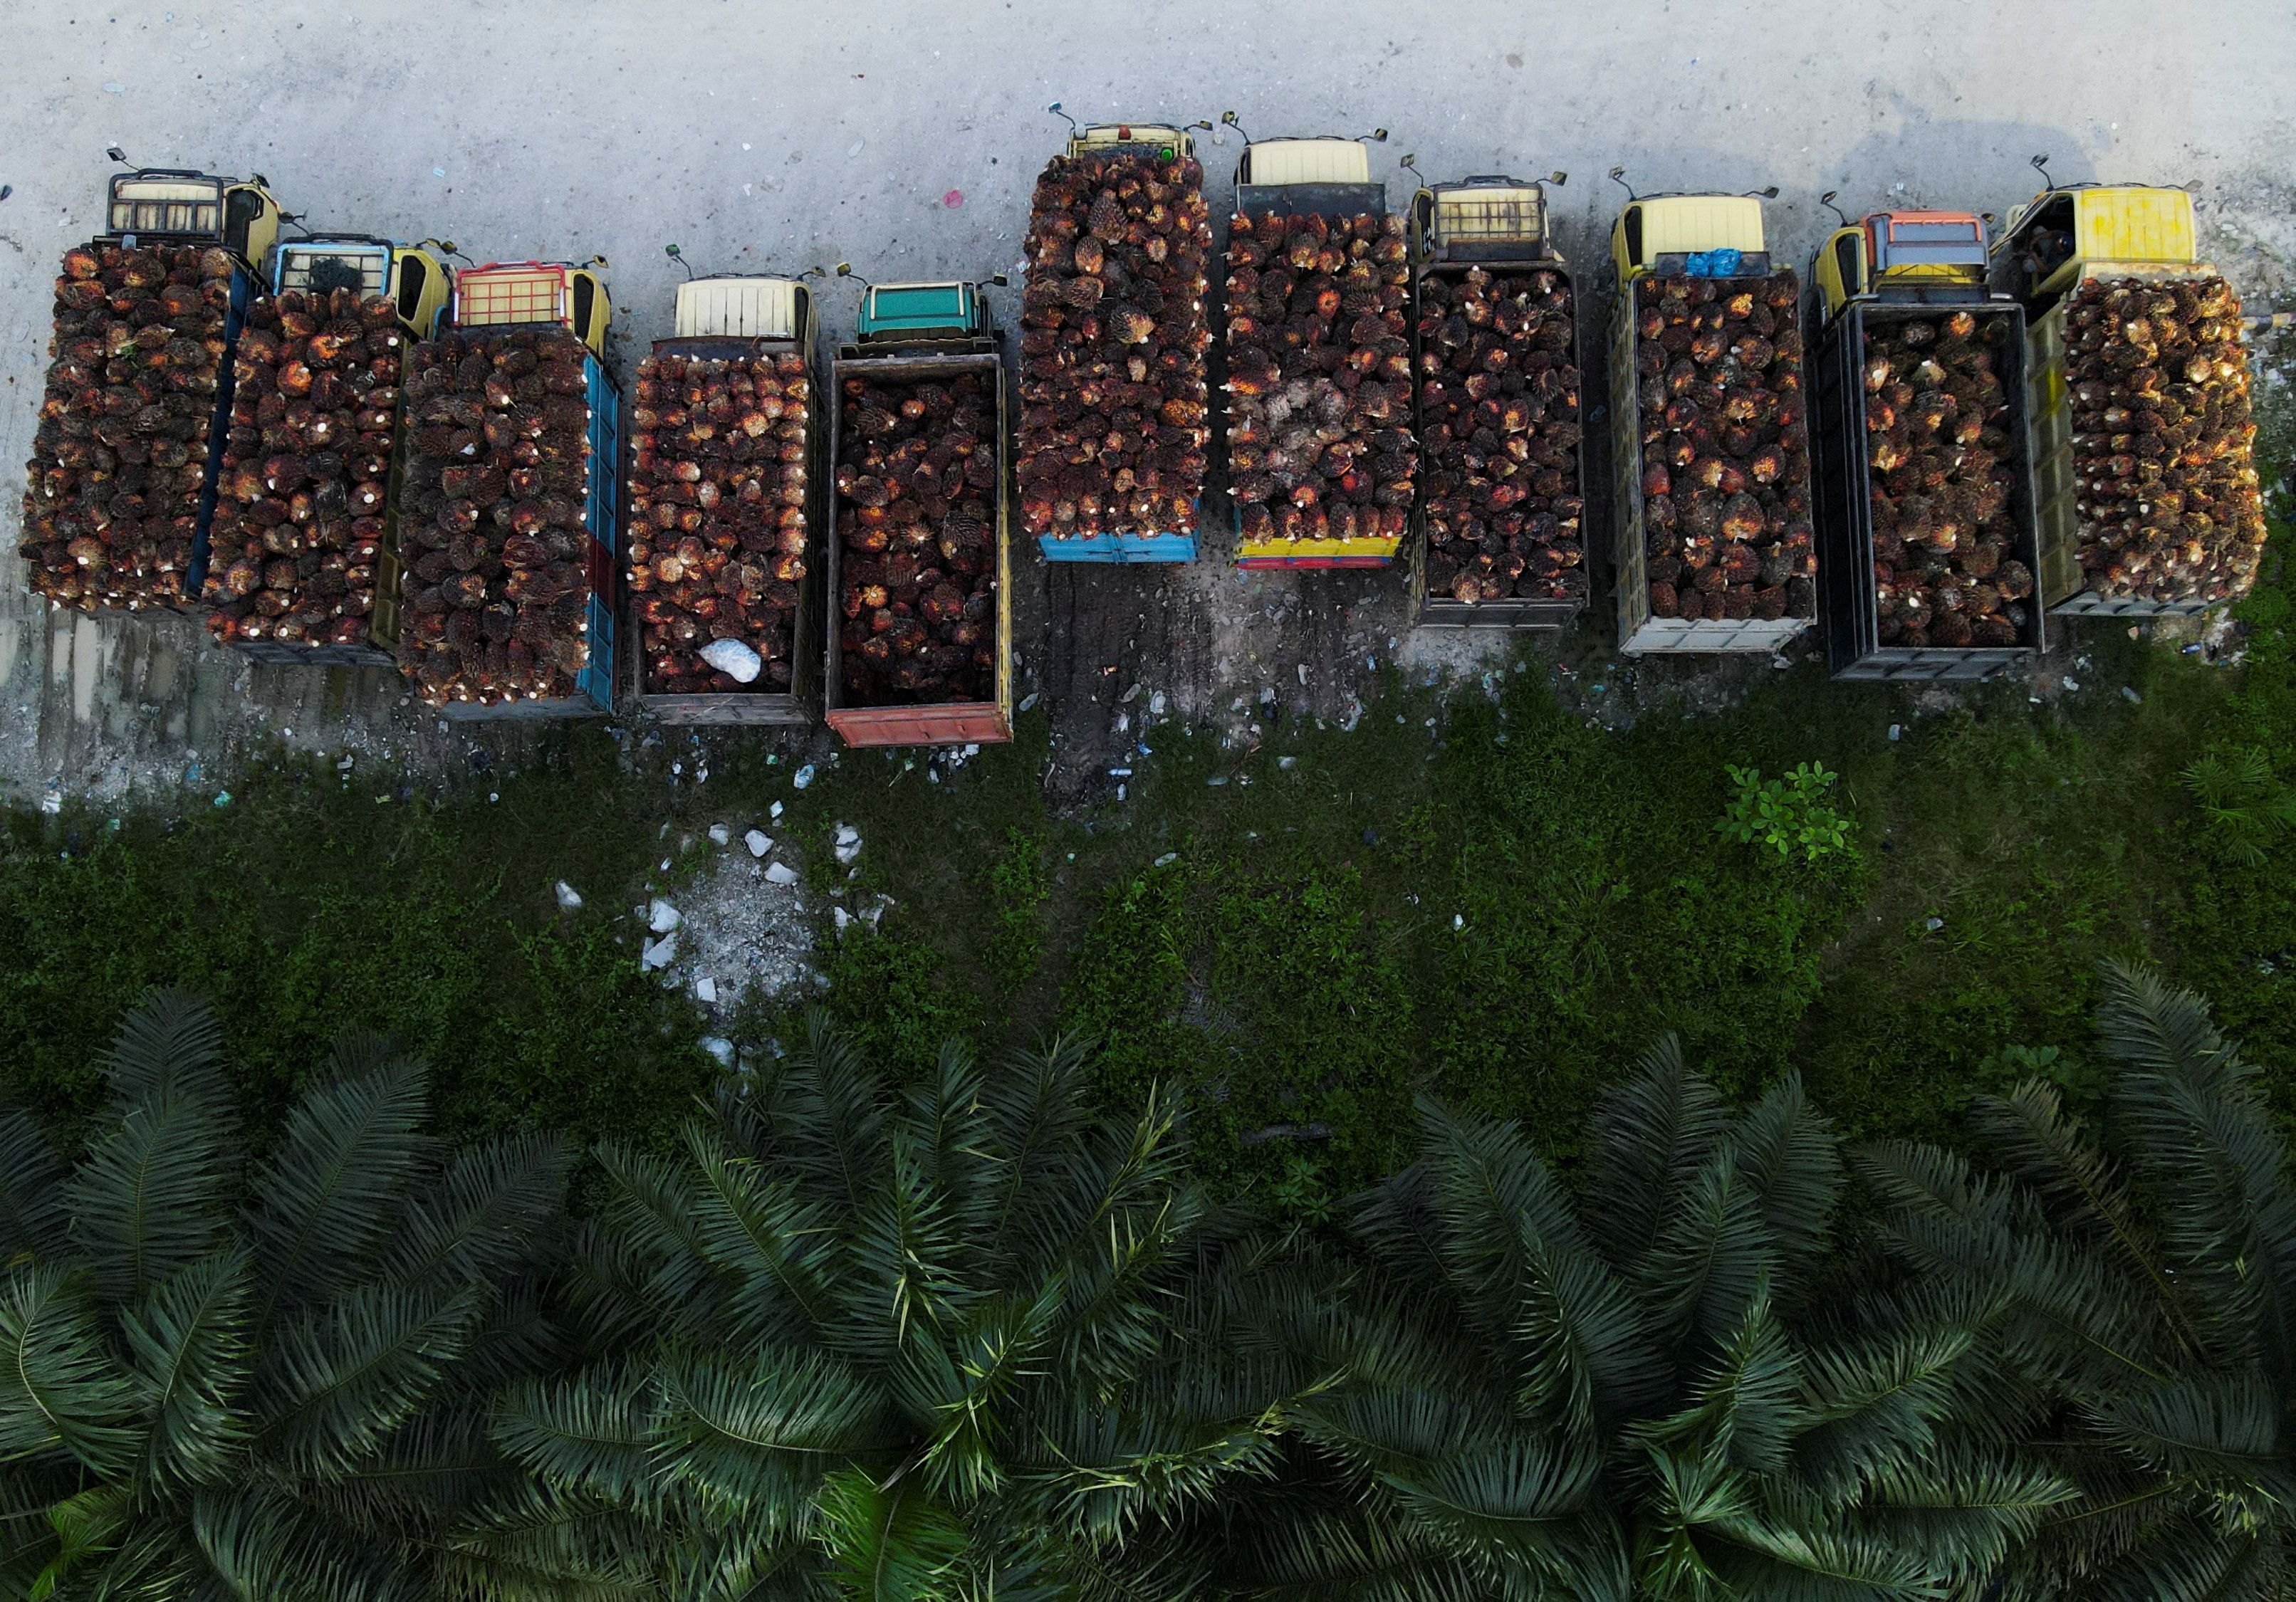 Trucks with palm oil fresh fruit bunches are parked in a queue at a palm oil factory in Siak regency